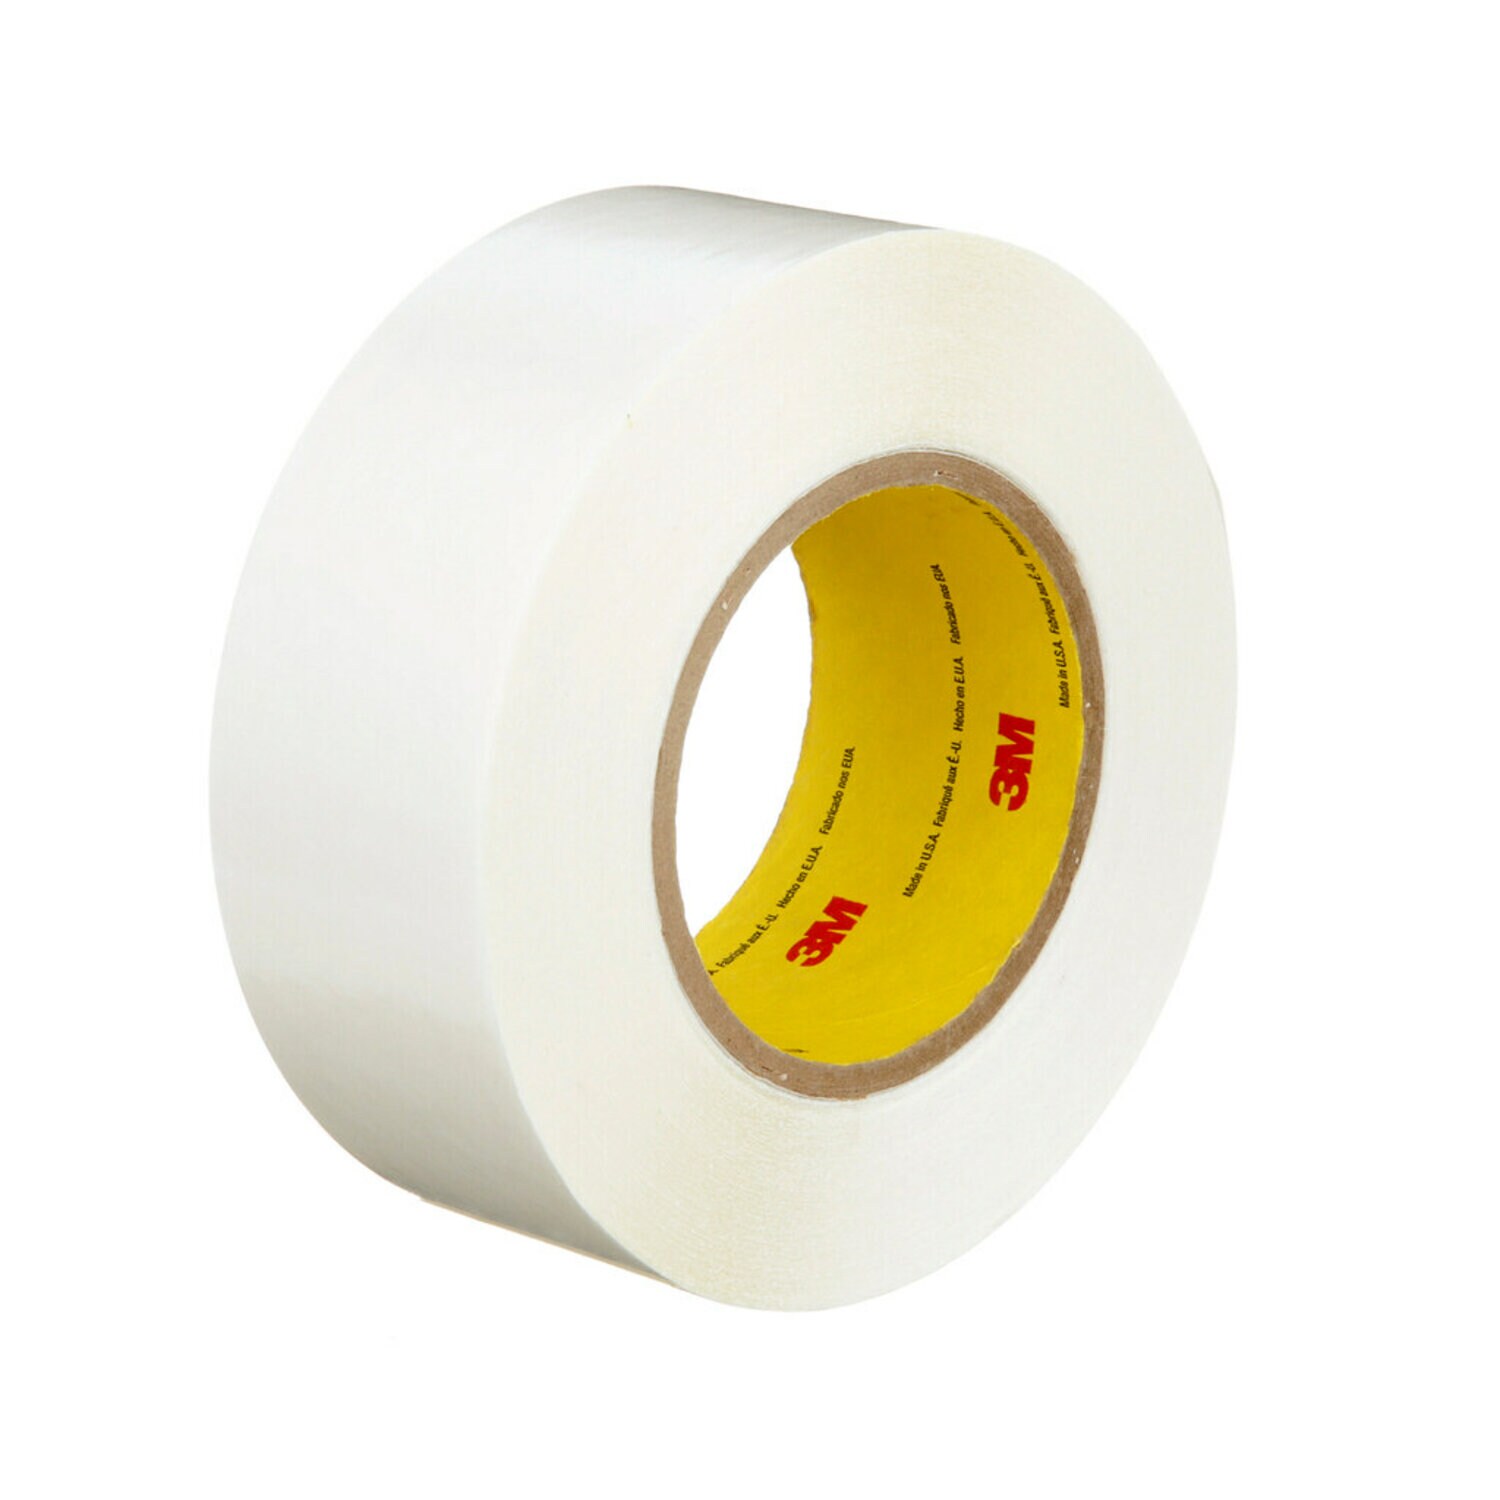 7000048601 - 3M Double Coated Tape 9579, White, 2 in x 36 yd, 9 mil, 24 rolls per
case